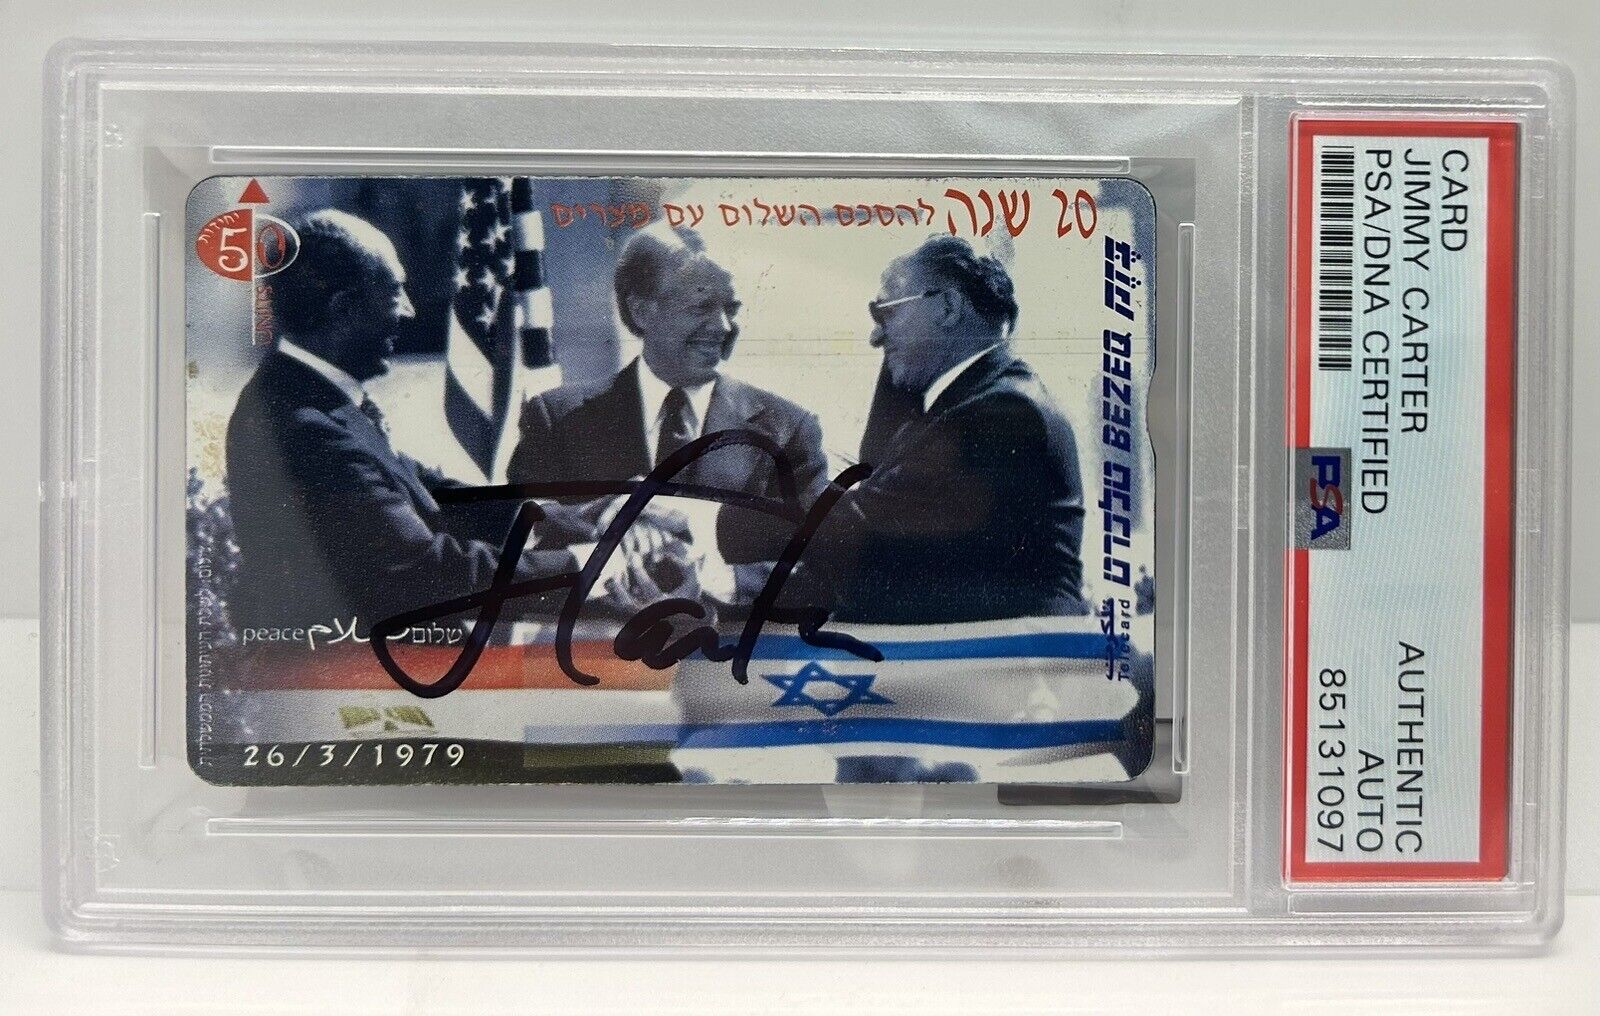 Jimmy Carter Signed Telecard Phone Card Trading Peace Accords Autograph PSA DNA